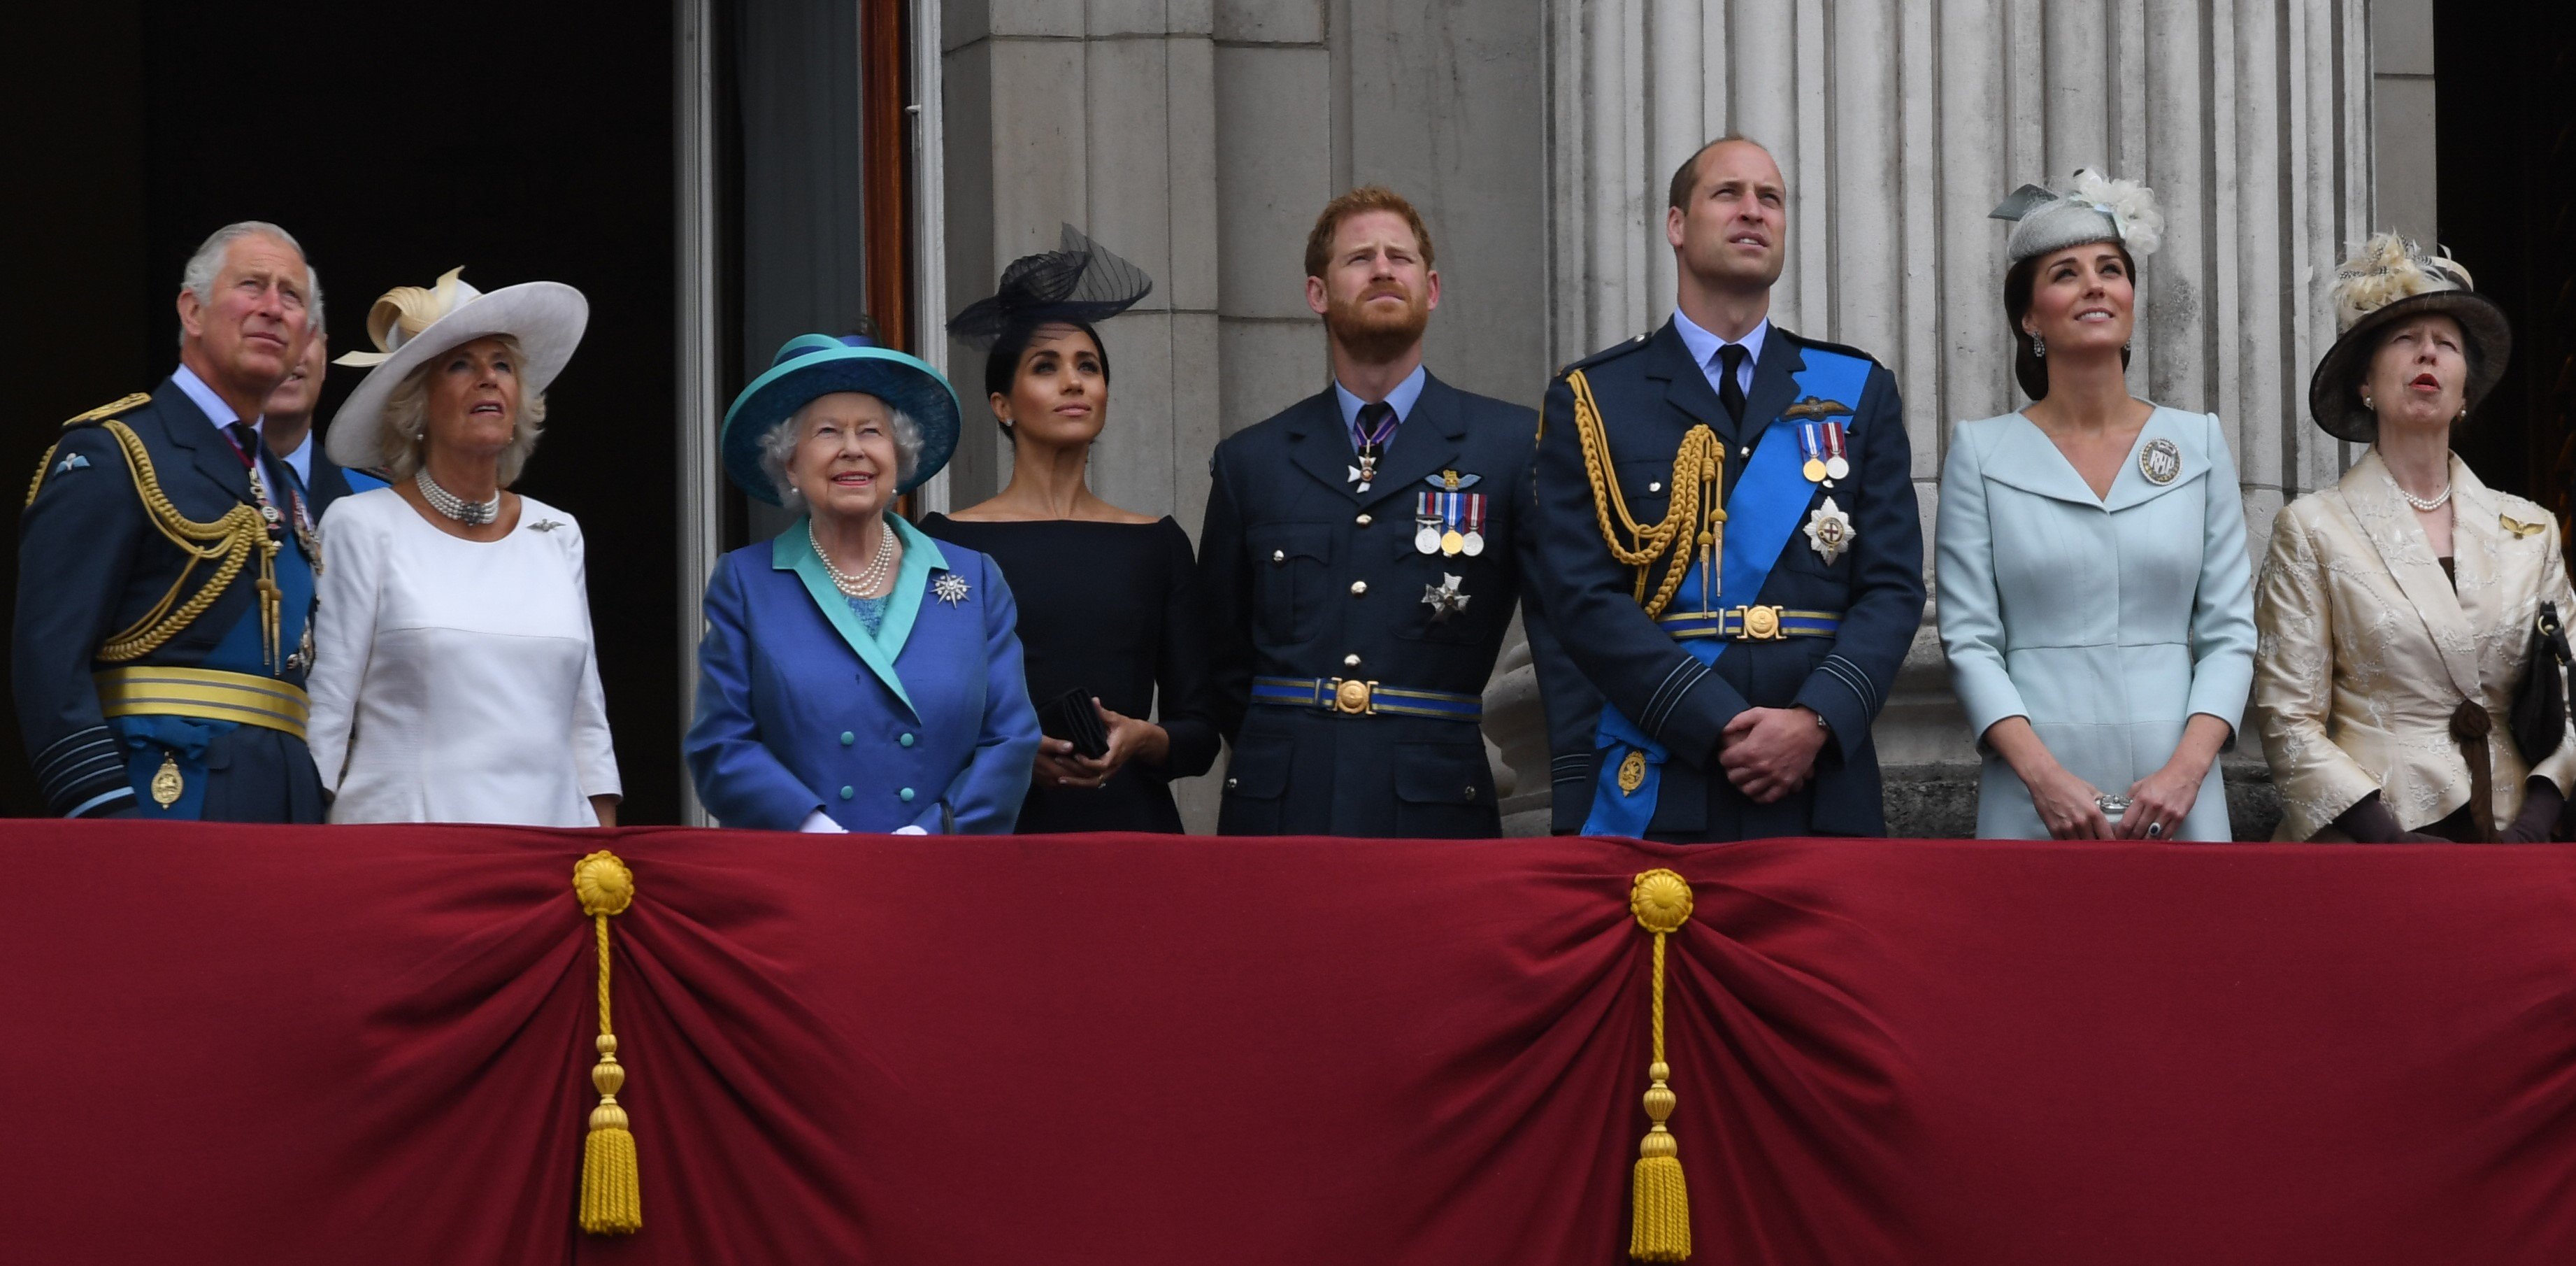 The Royal Family standing on the Buckingham Palace balcony watching a flypast